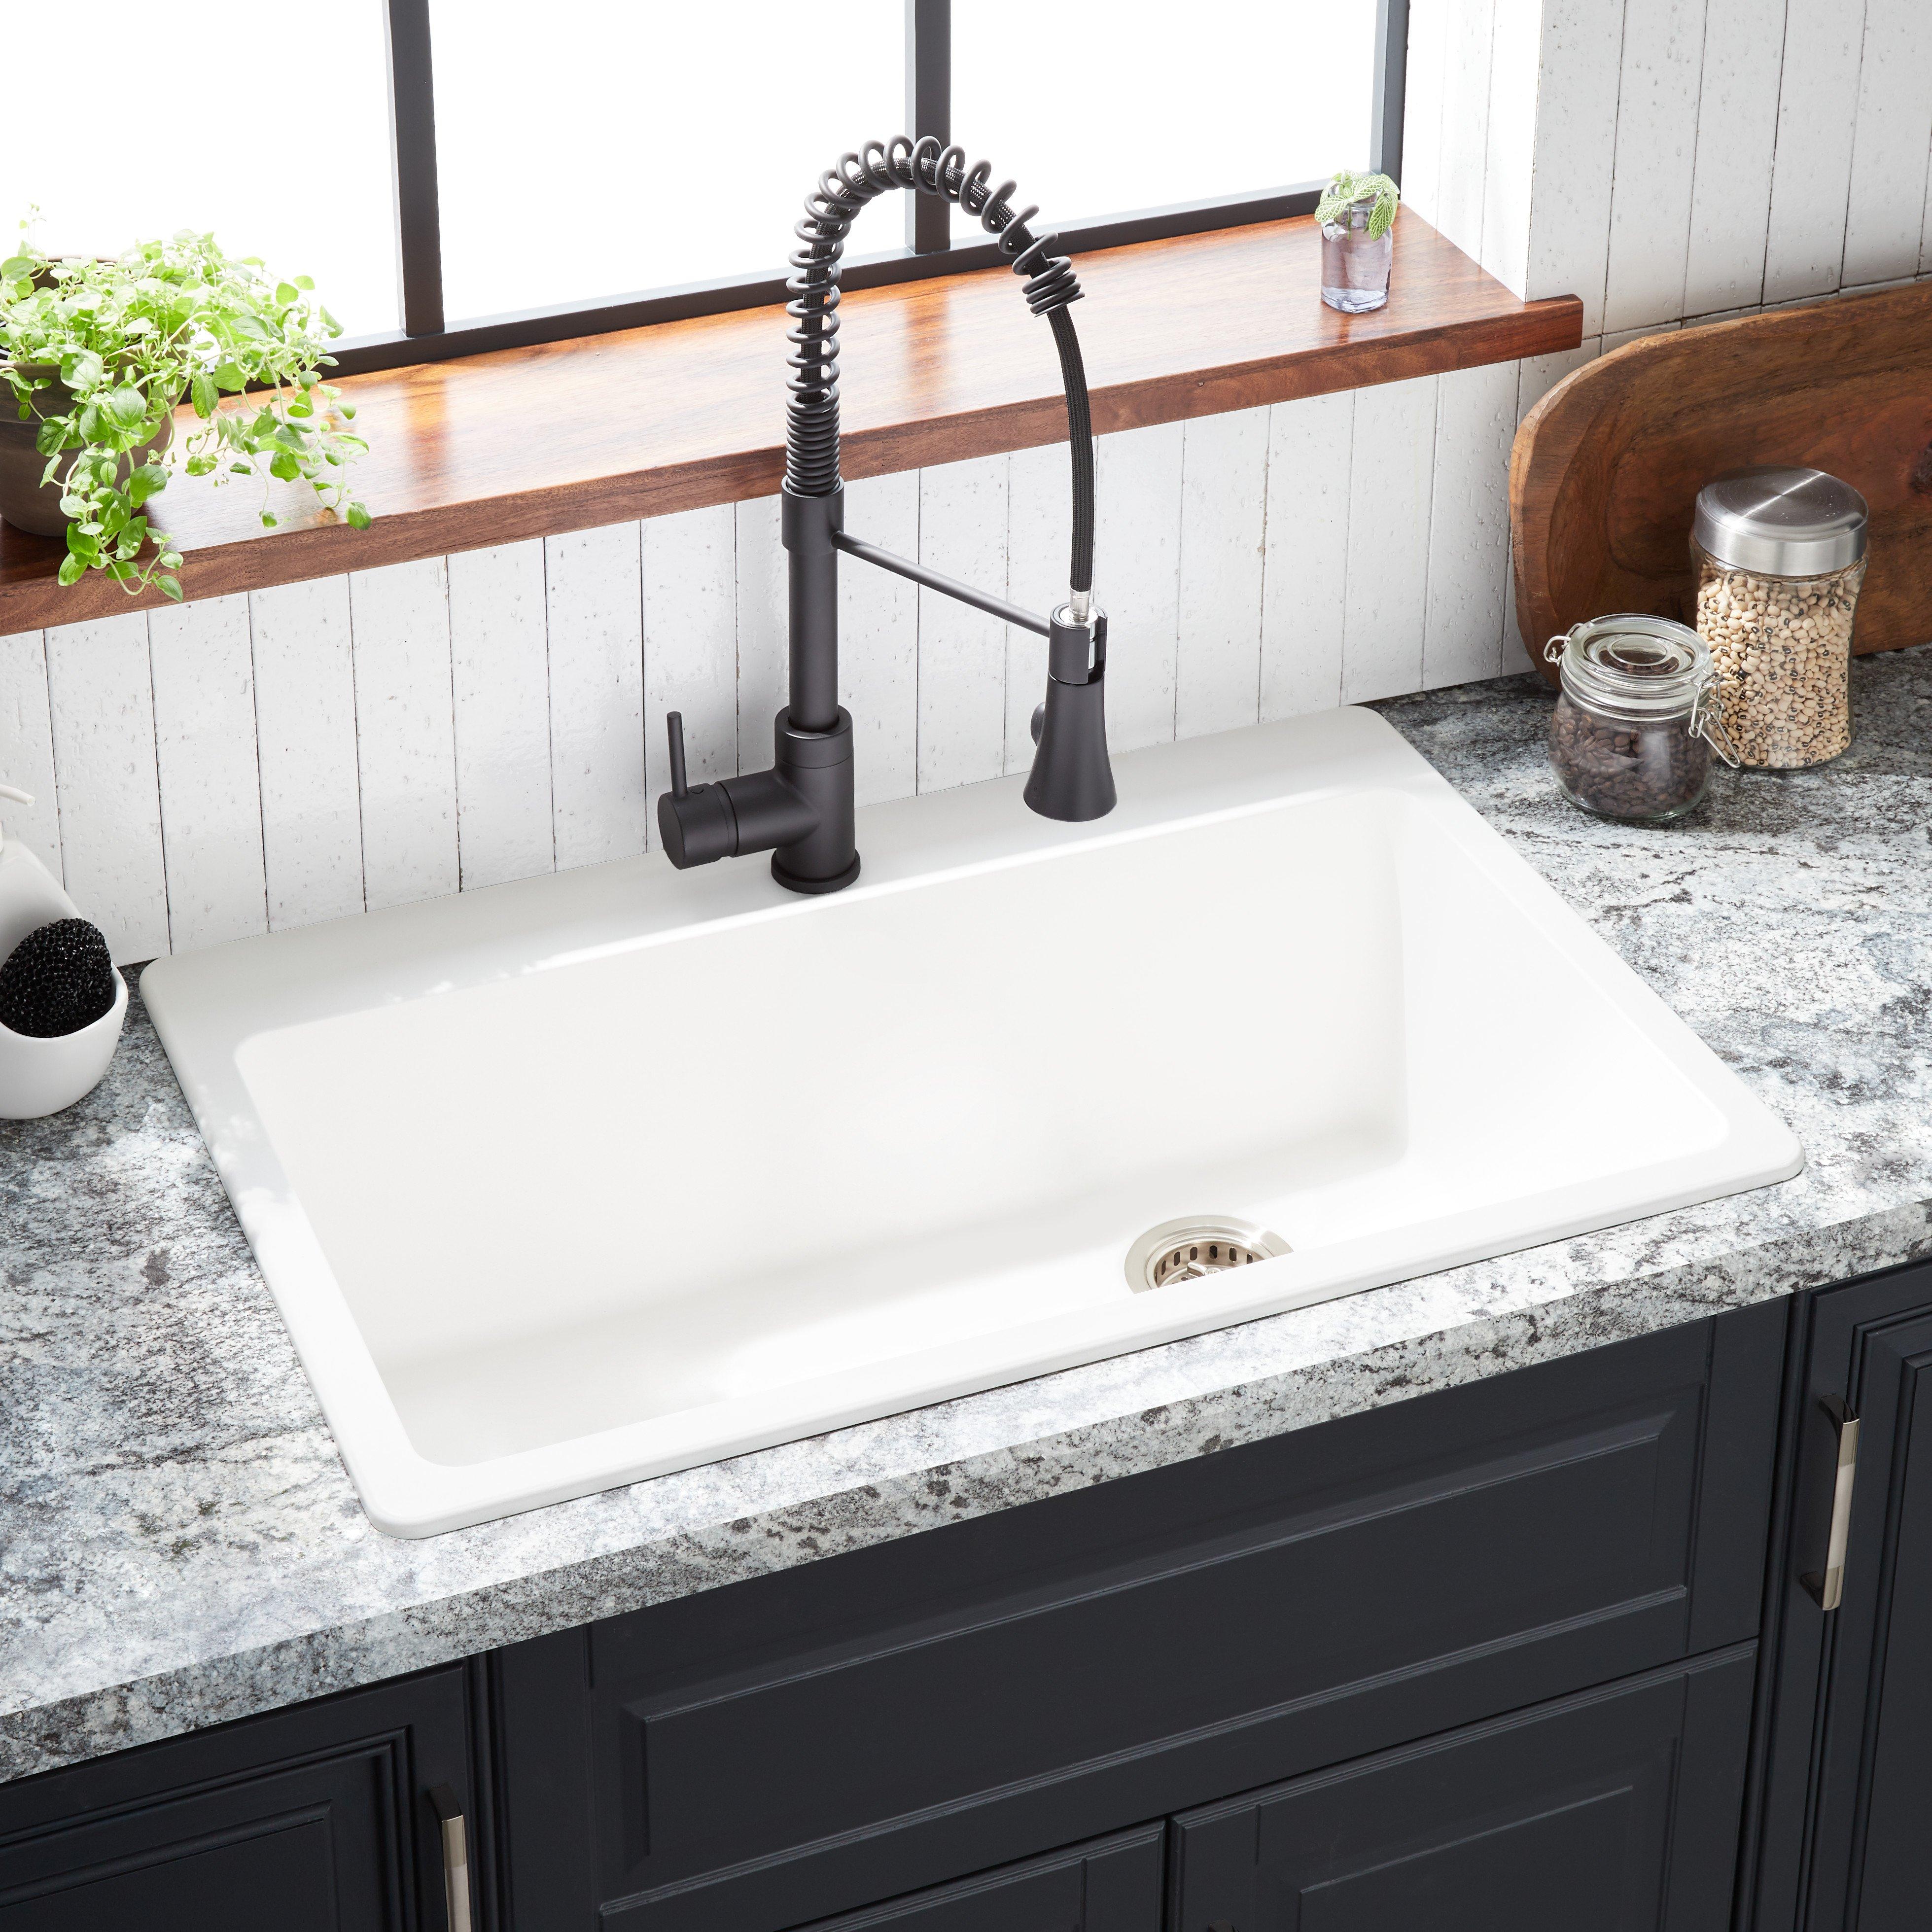 The Newest Essential: A Second Kitchen Sink